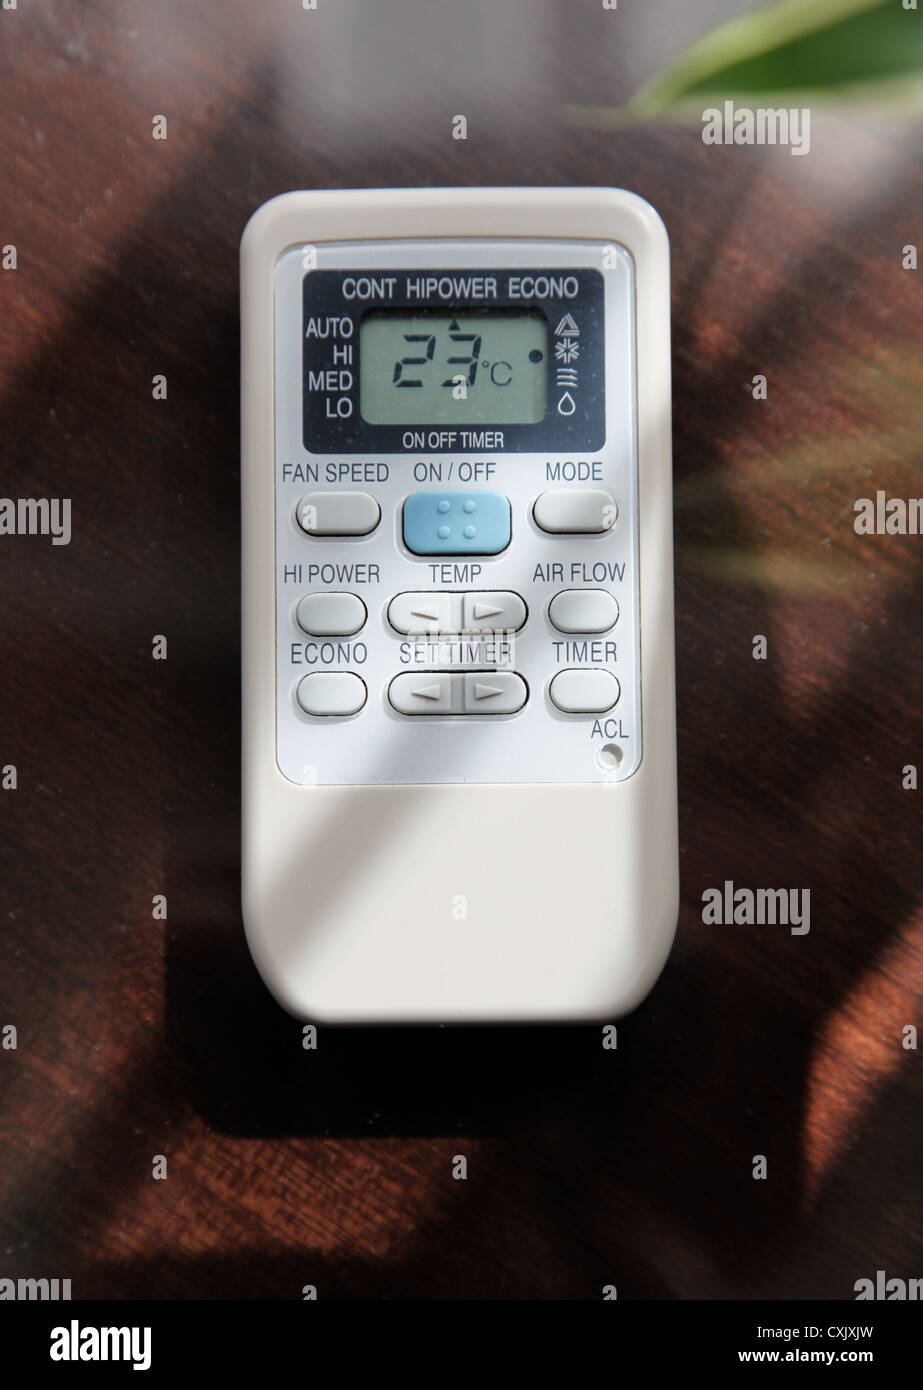 It's a photo of a remote control of the air conditioned in a room. It's stand on a wood table with a natural light. 23 degres Stock Photo